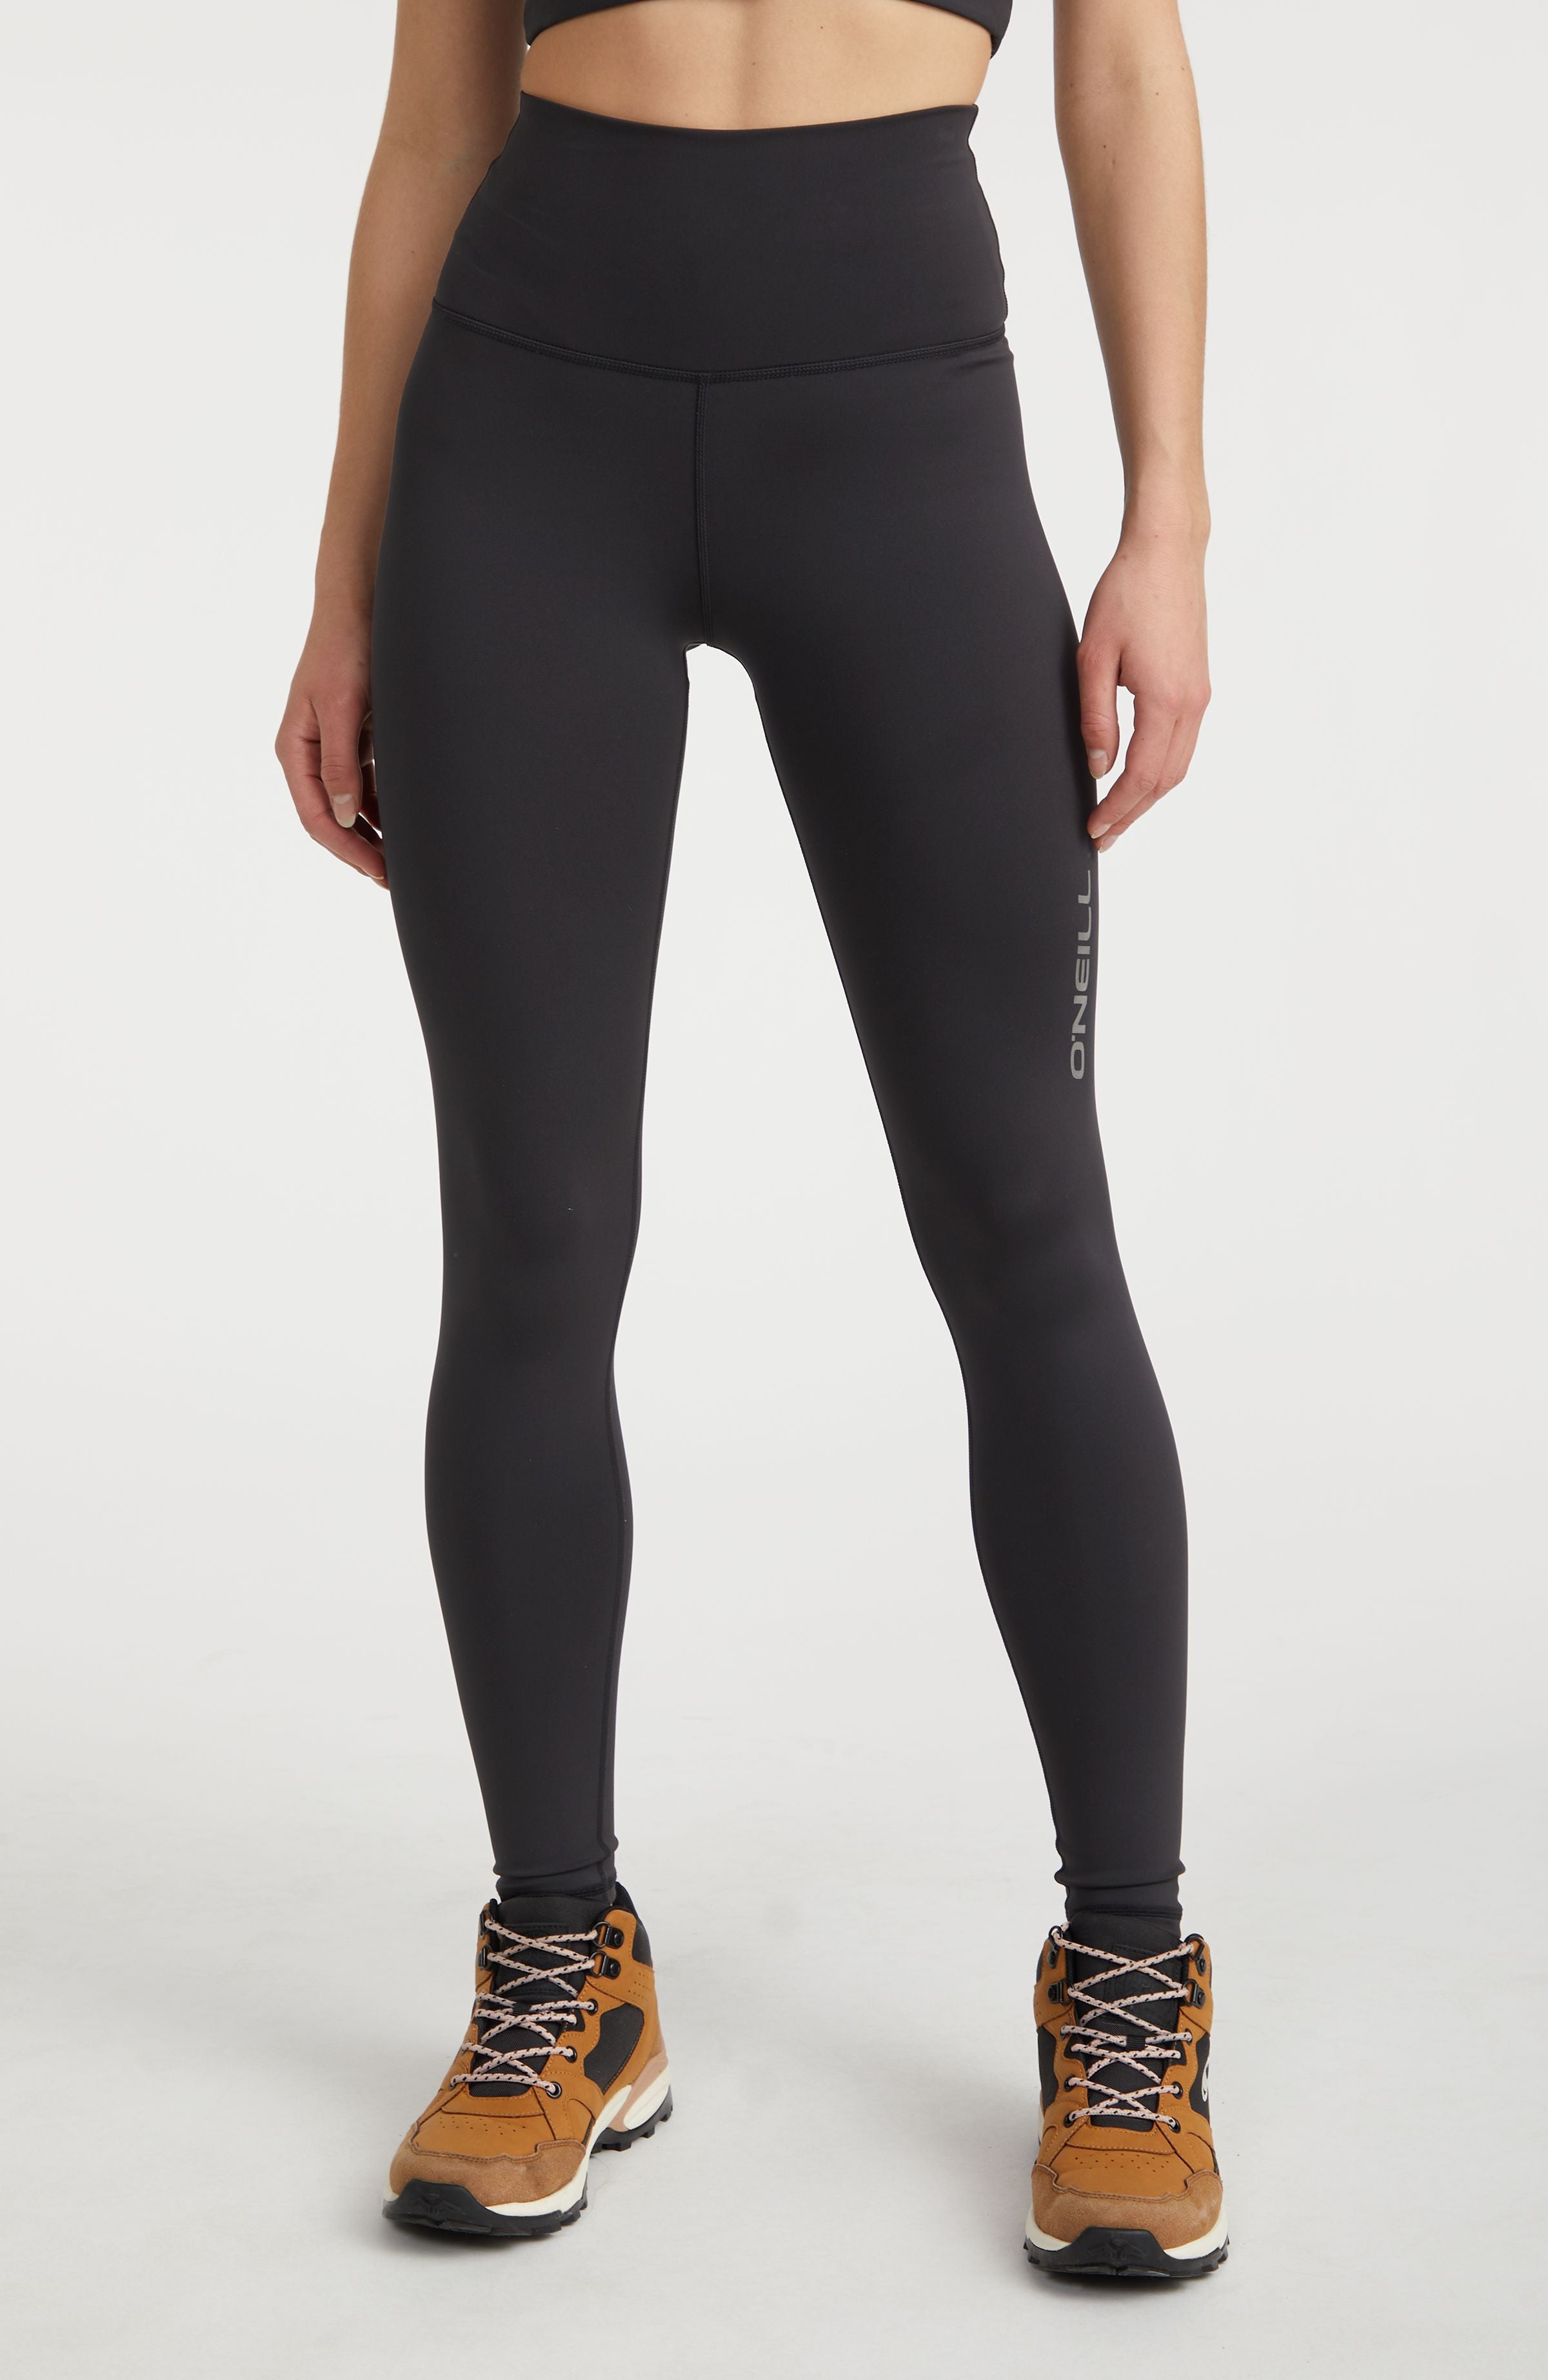 Blackout leggings from M&S with full coverage for any exercise